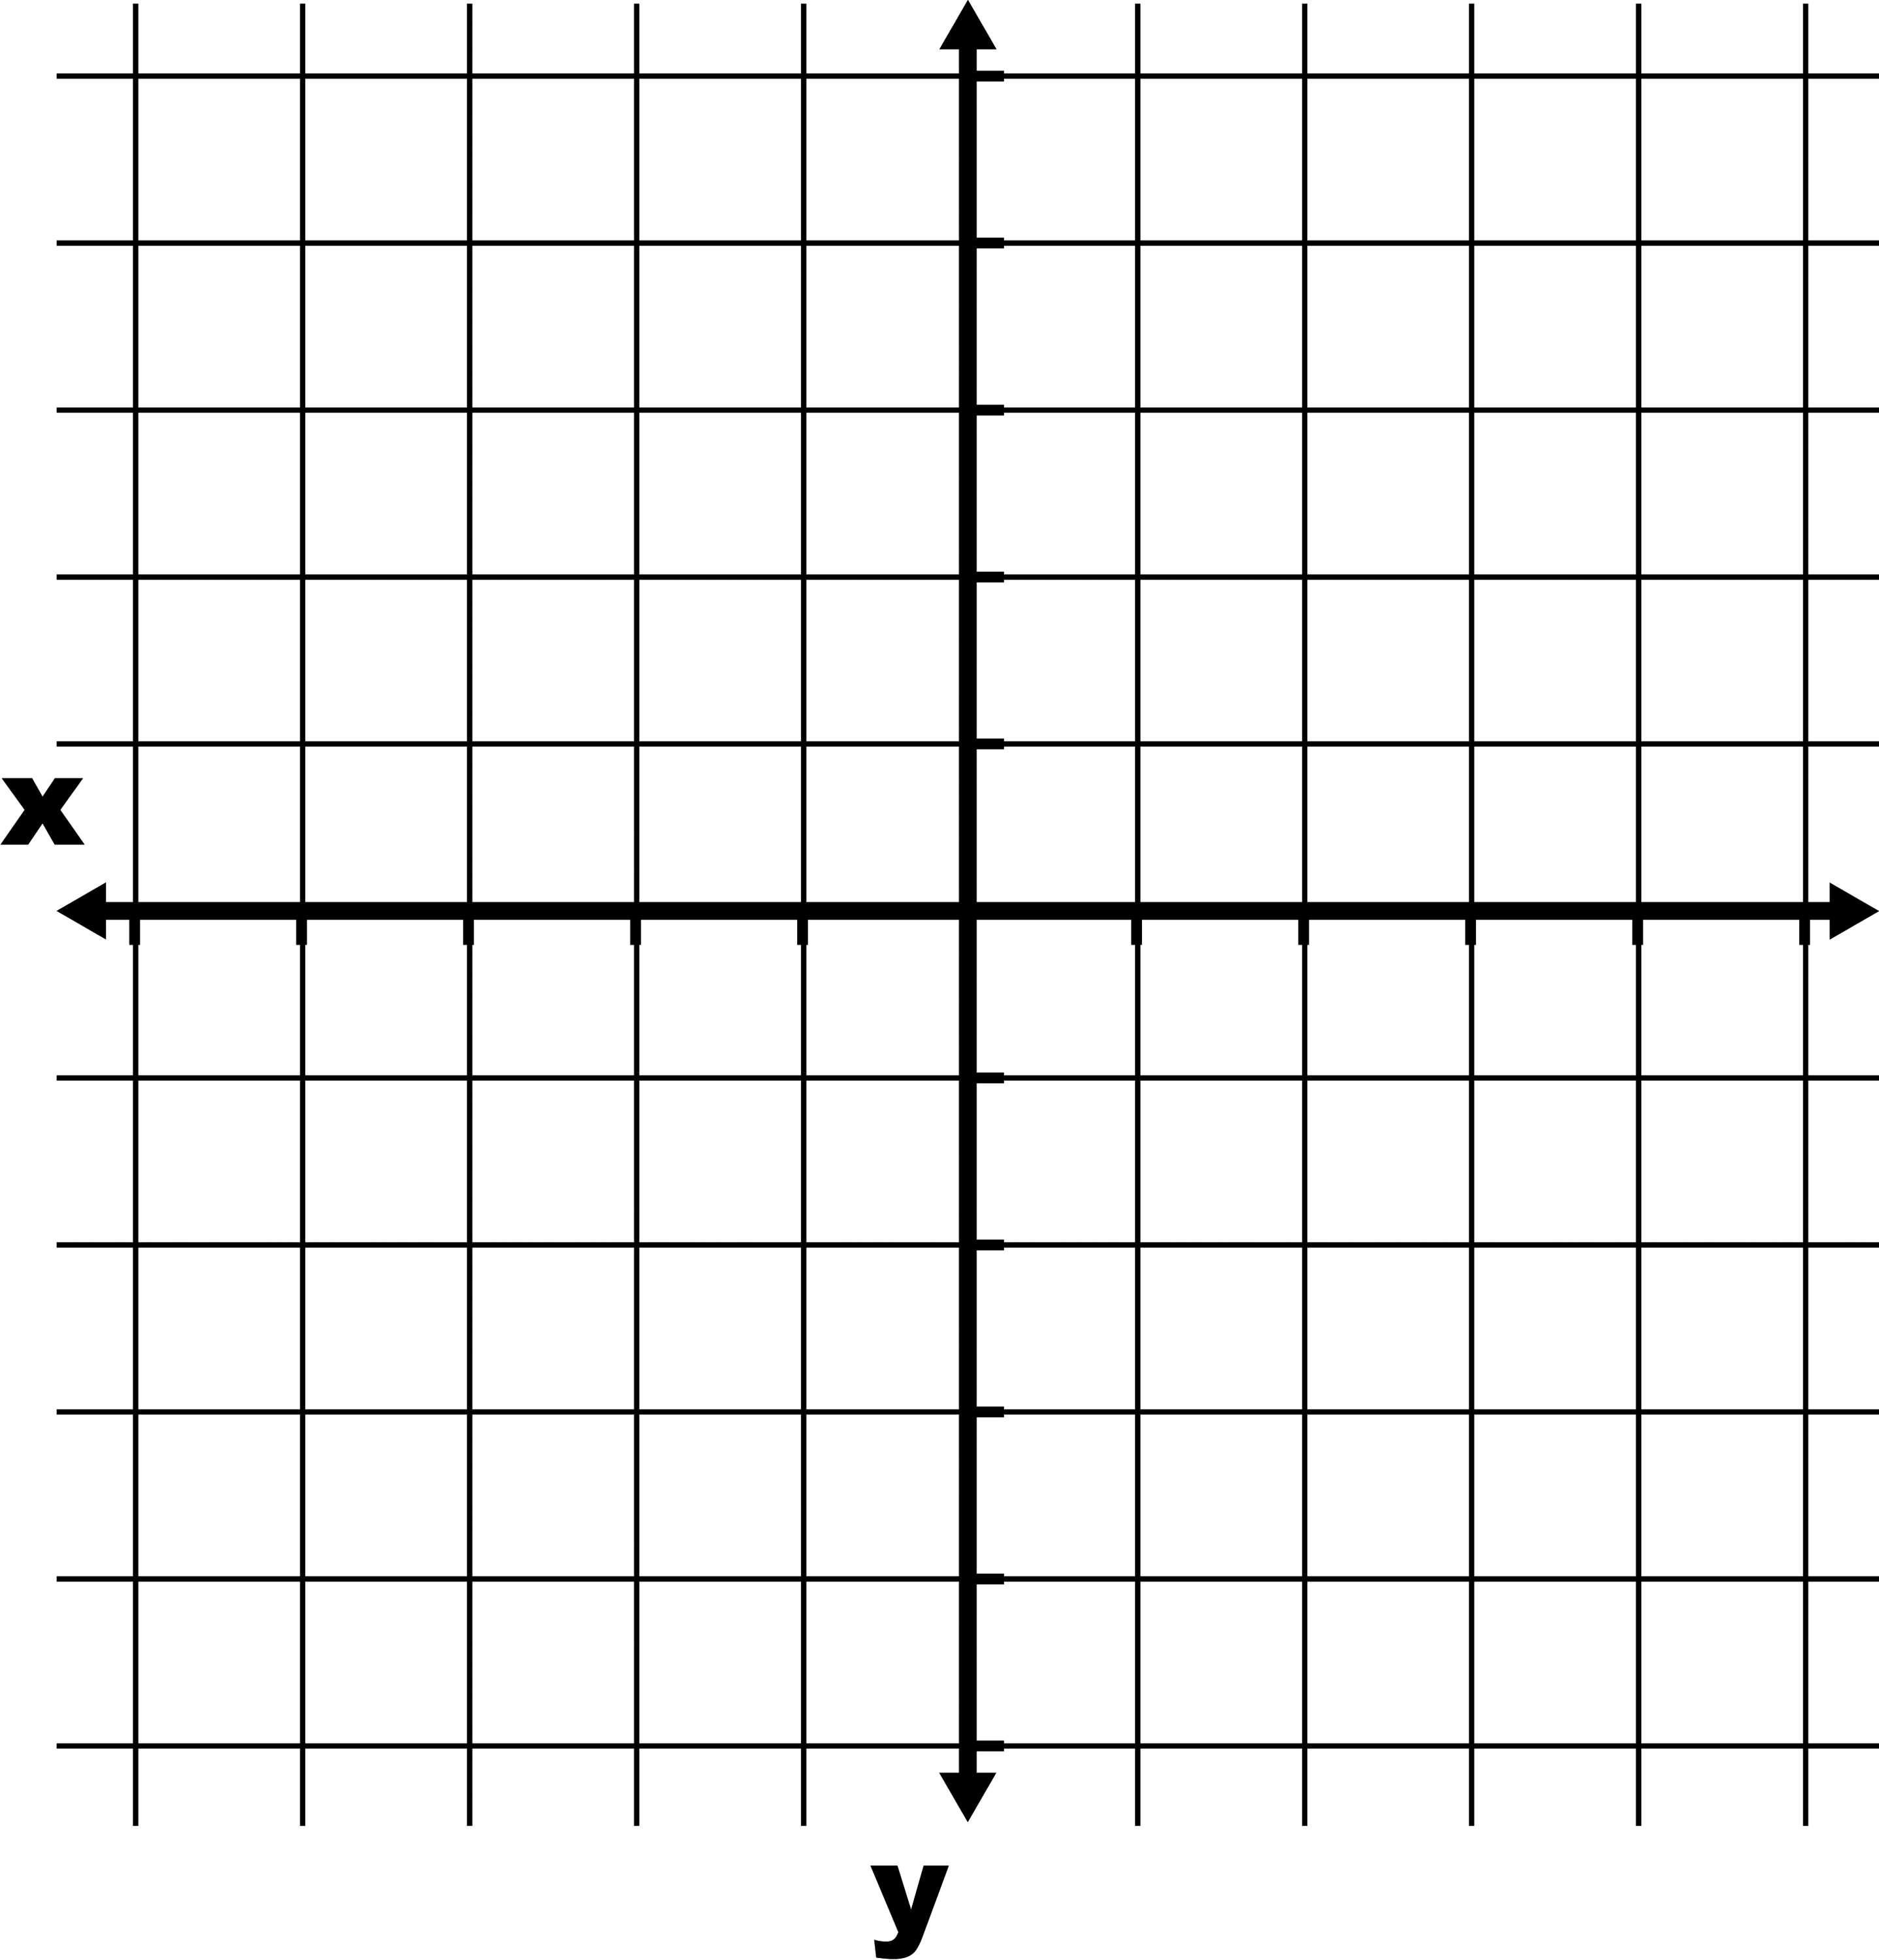 Coordinate Grid With Axes Labeled And Grid Lines Shown   Clipart Etc